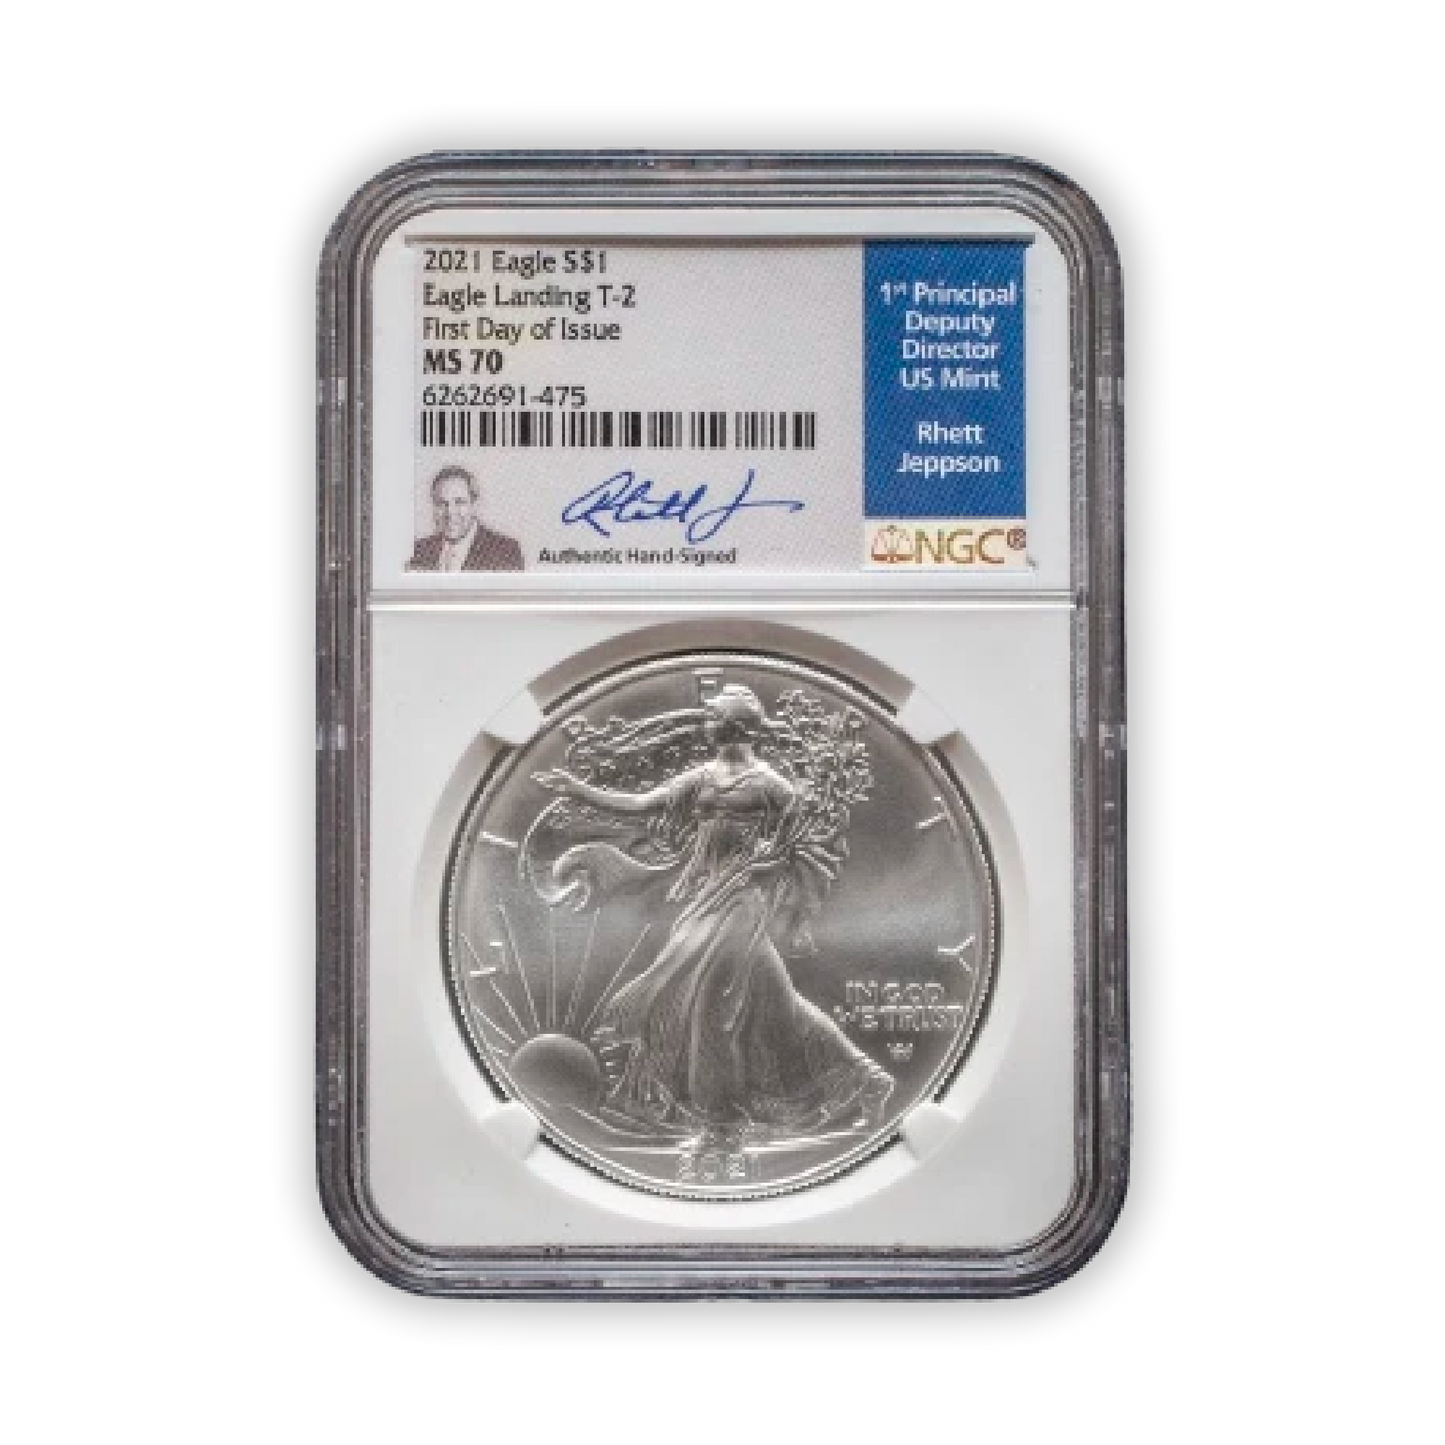 2021 Silver Eagle - Business Strike - Type 2 - NGC MS70 FDOI First Day of Issue Rhett Jeppson Signature Label